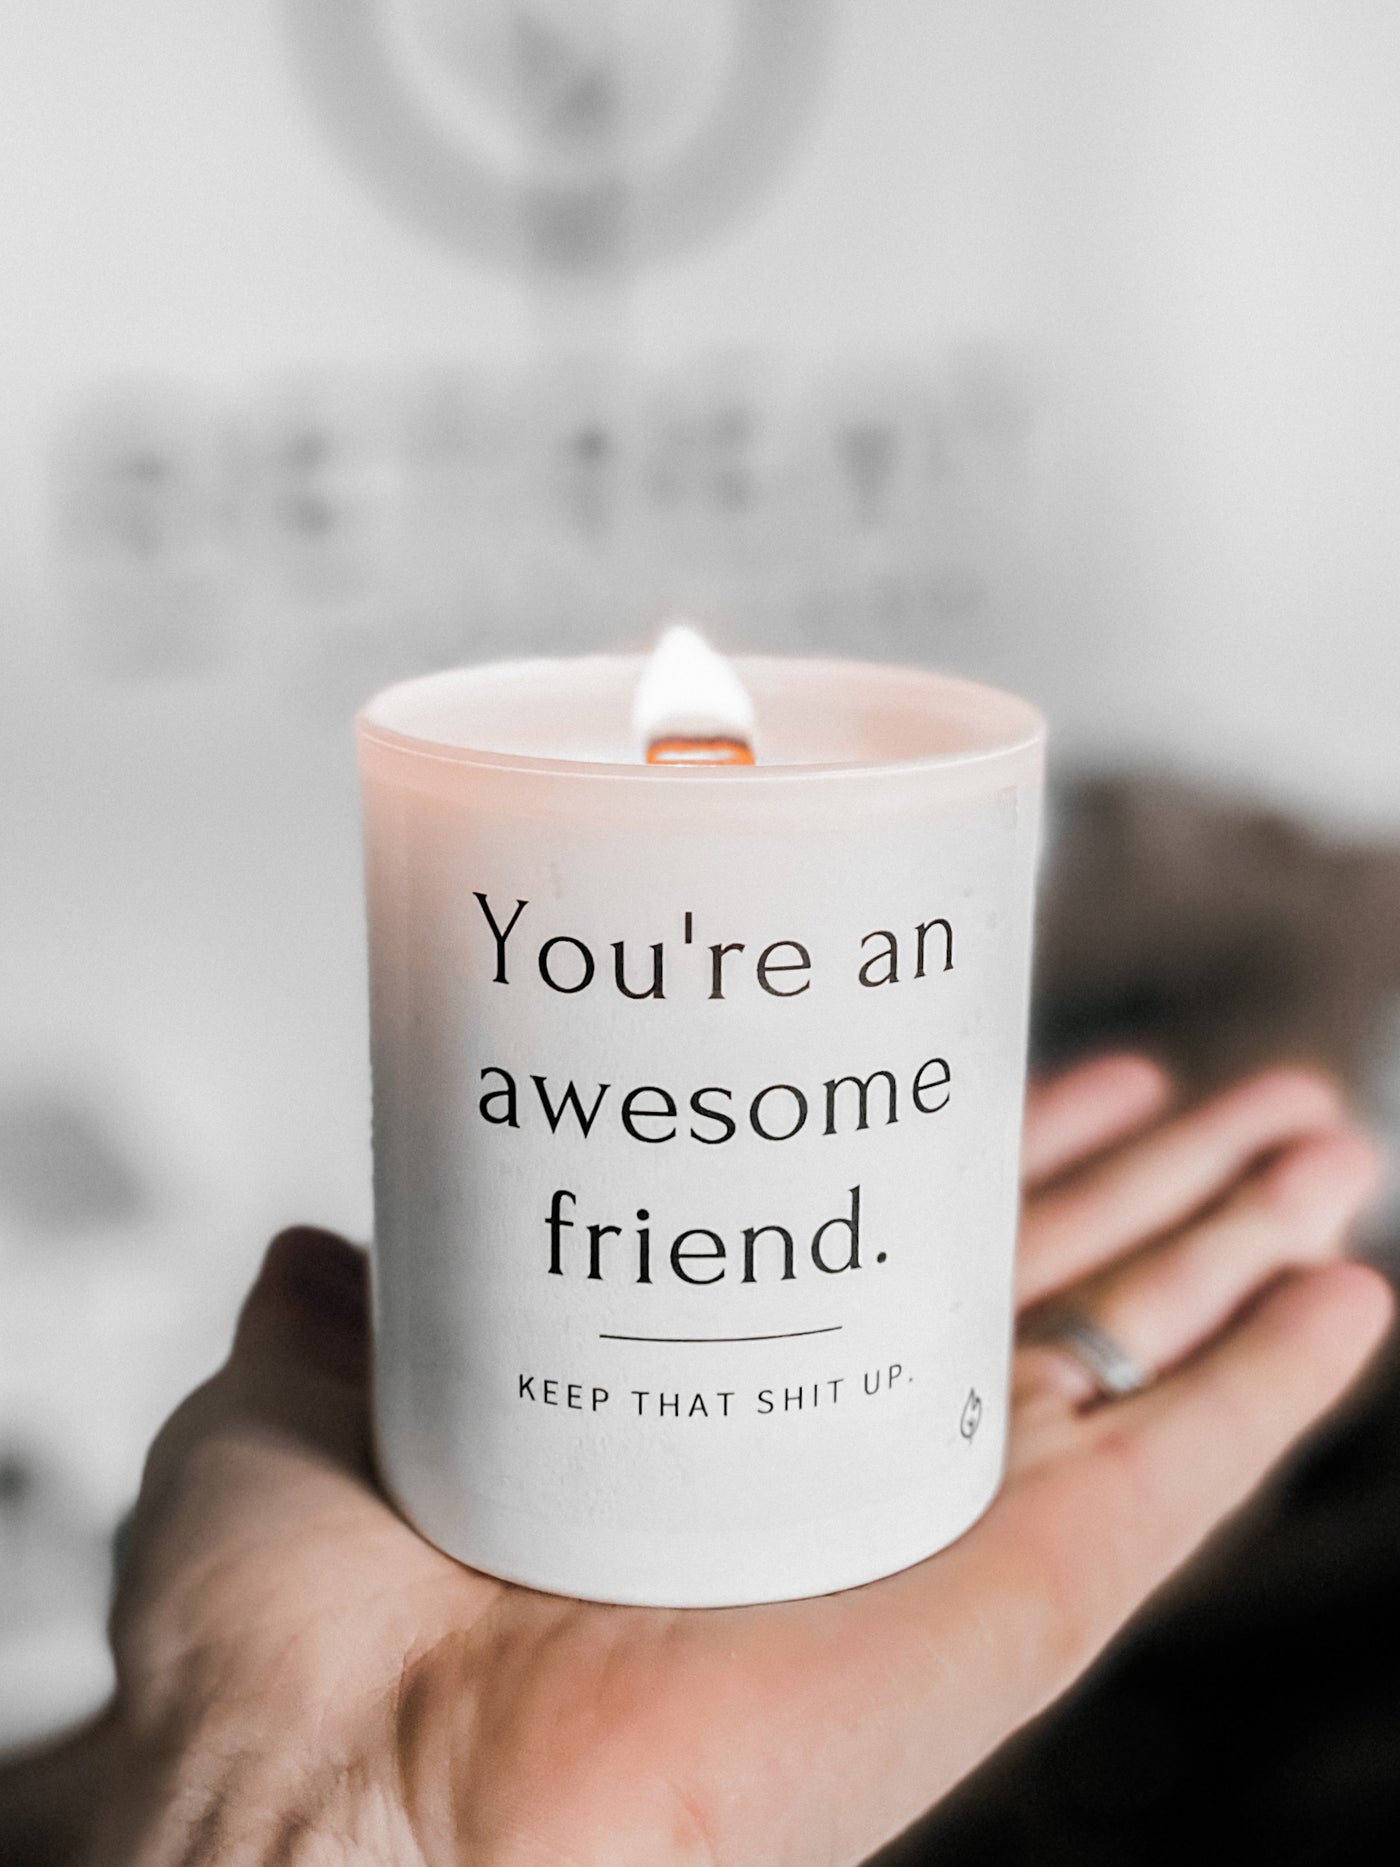 The Friend Candle